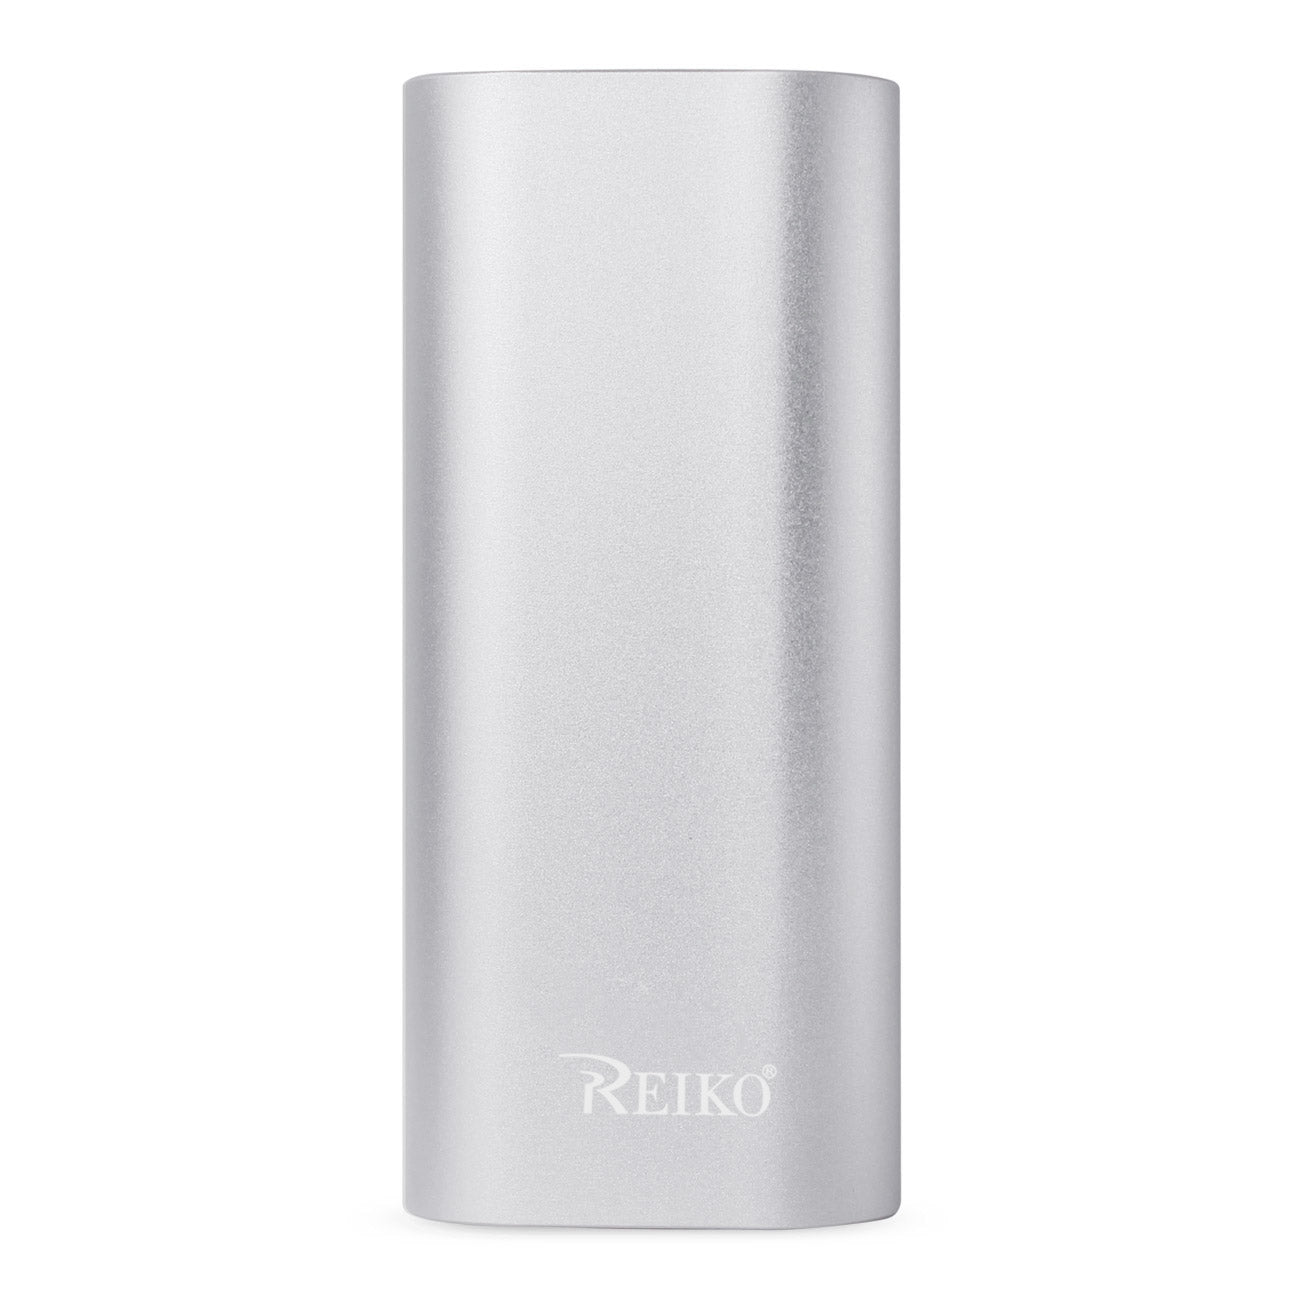 Power Bank Universal With Micro Cable 2A 5V 4800Mah Silver Color